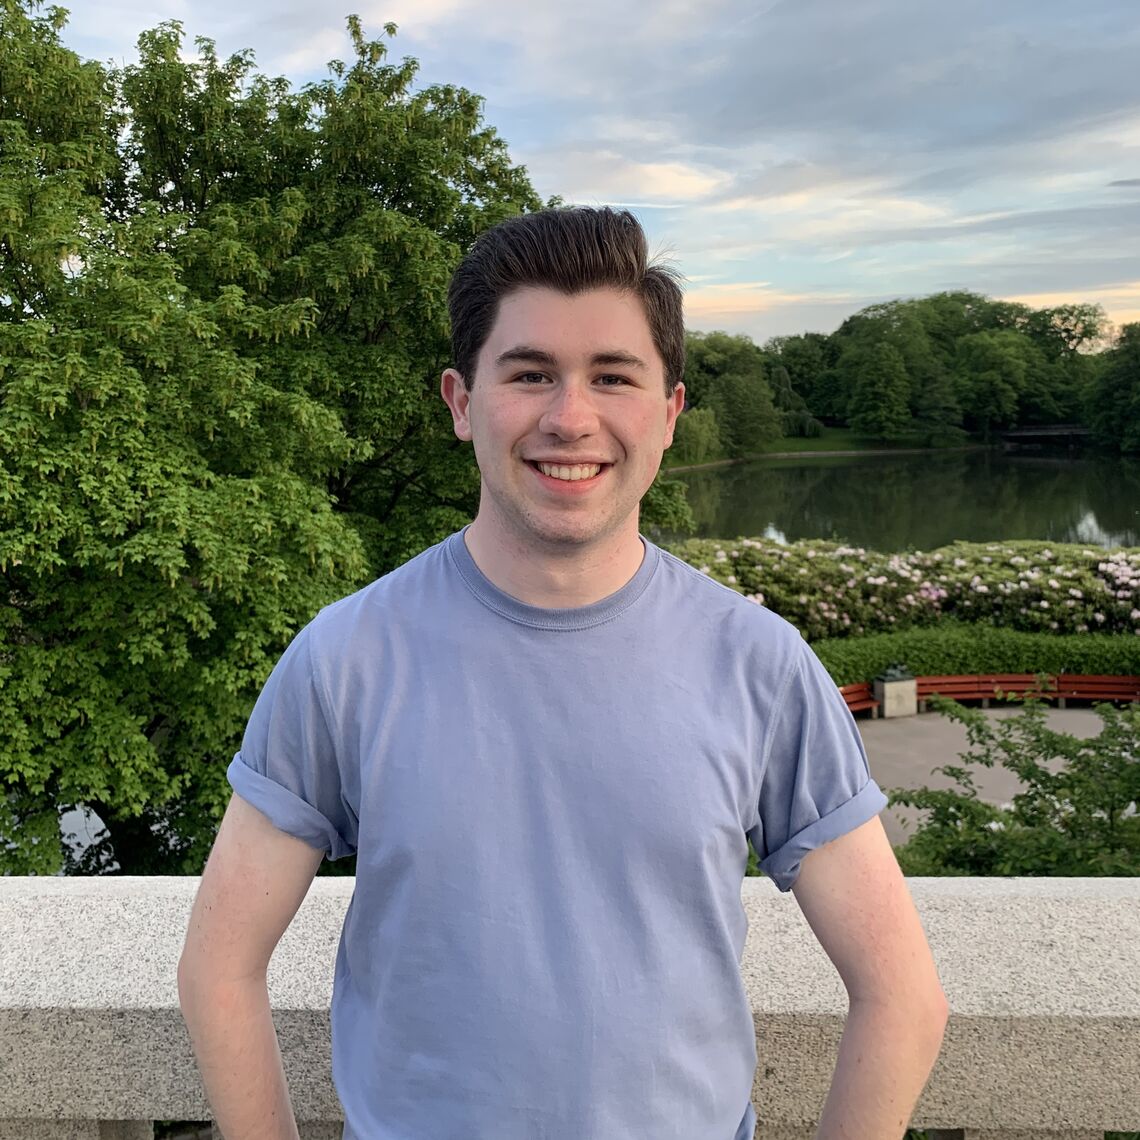 "I've always been interested in the connection between policy and protecting our environment.," said Jack Entsminger '23.